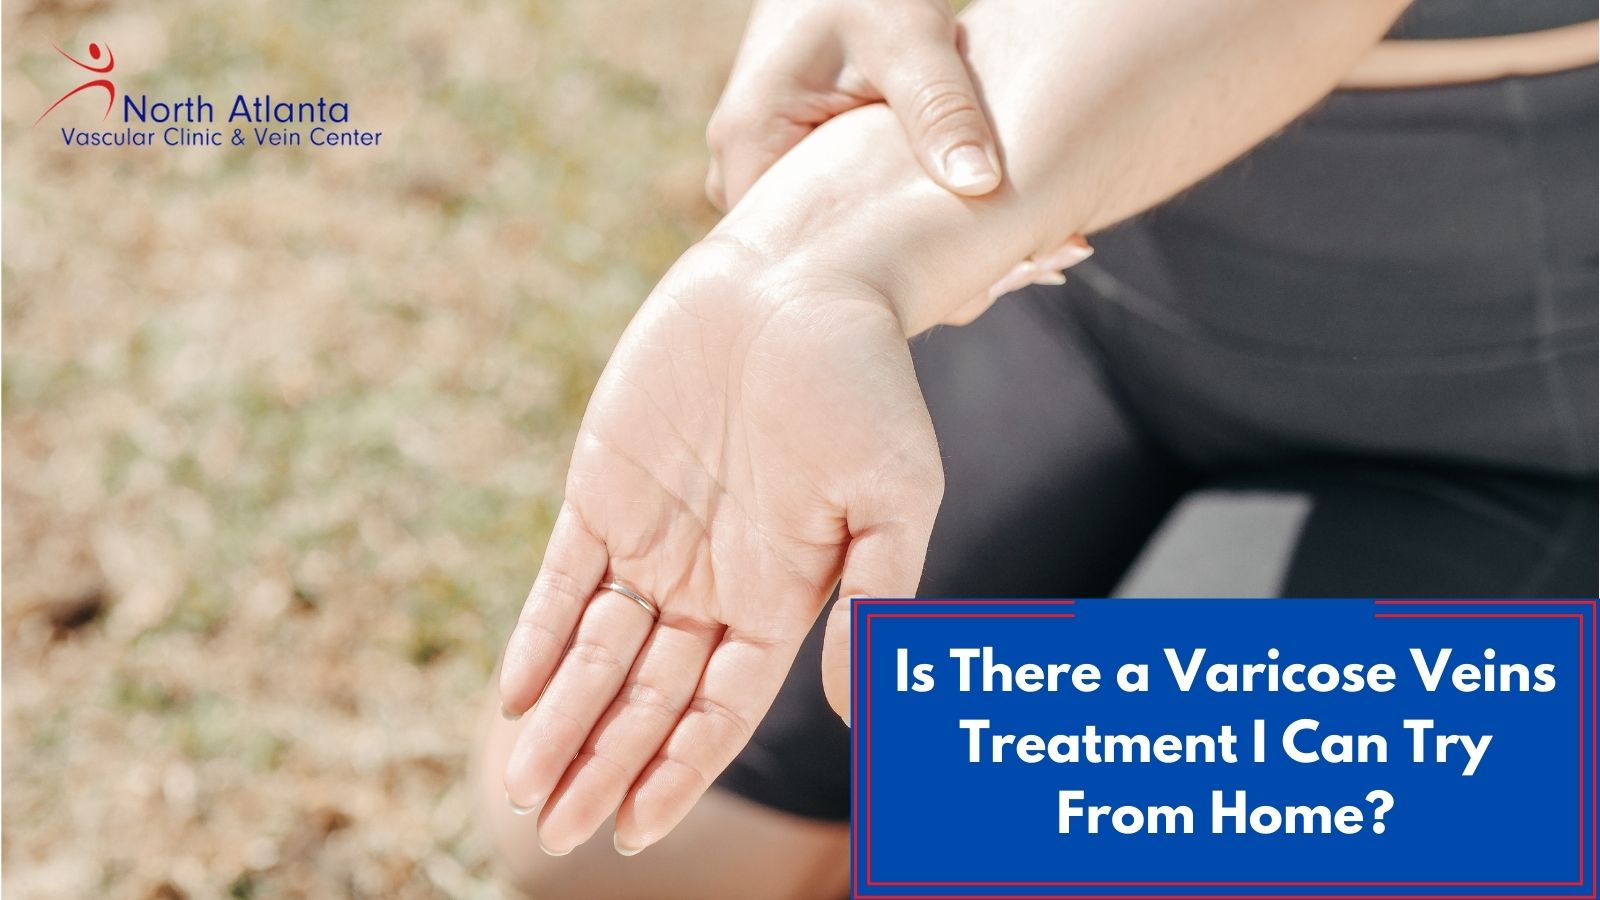 Is There a Varicose Veins Treatment I Can Try From Home?